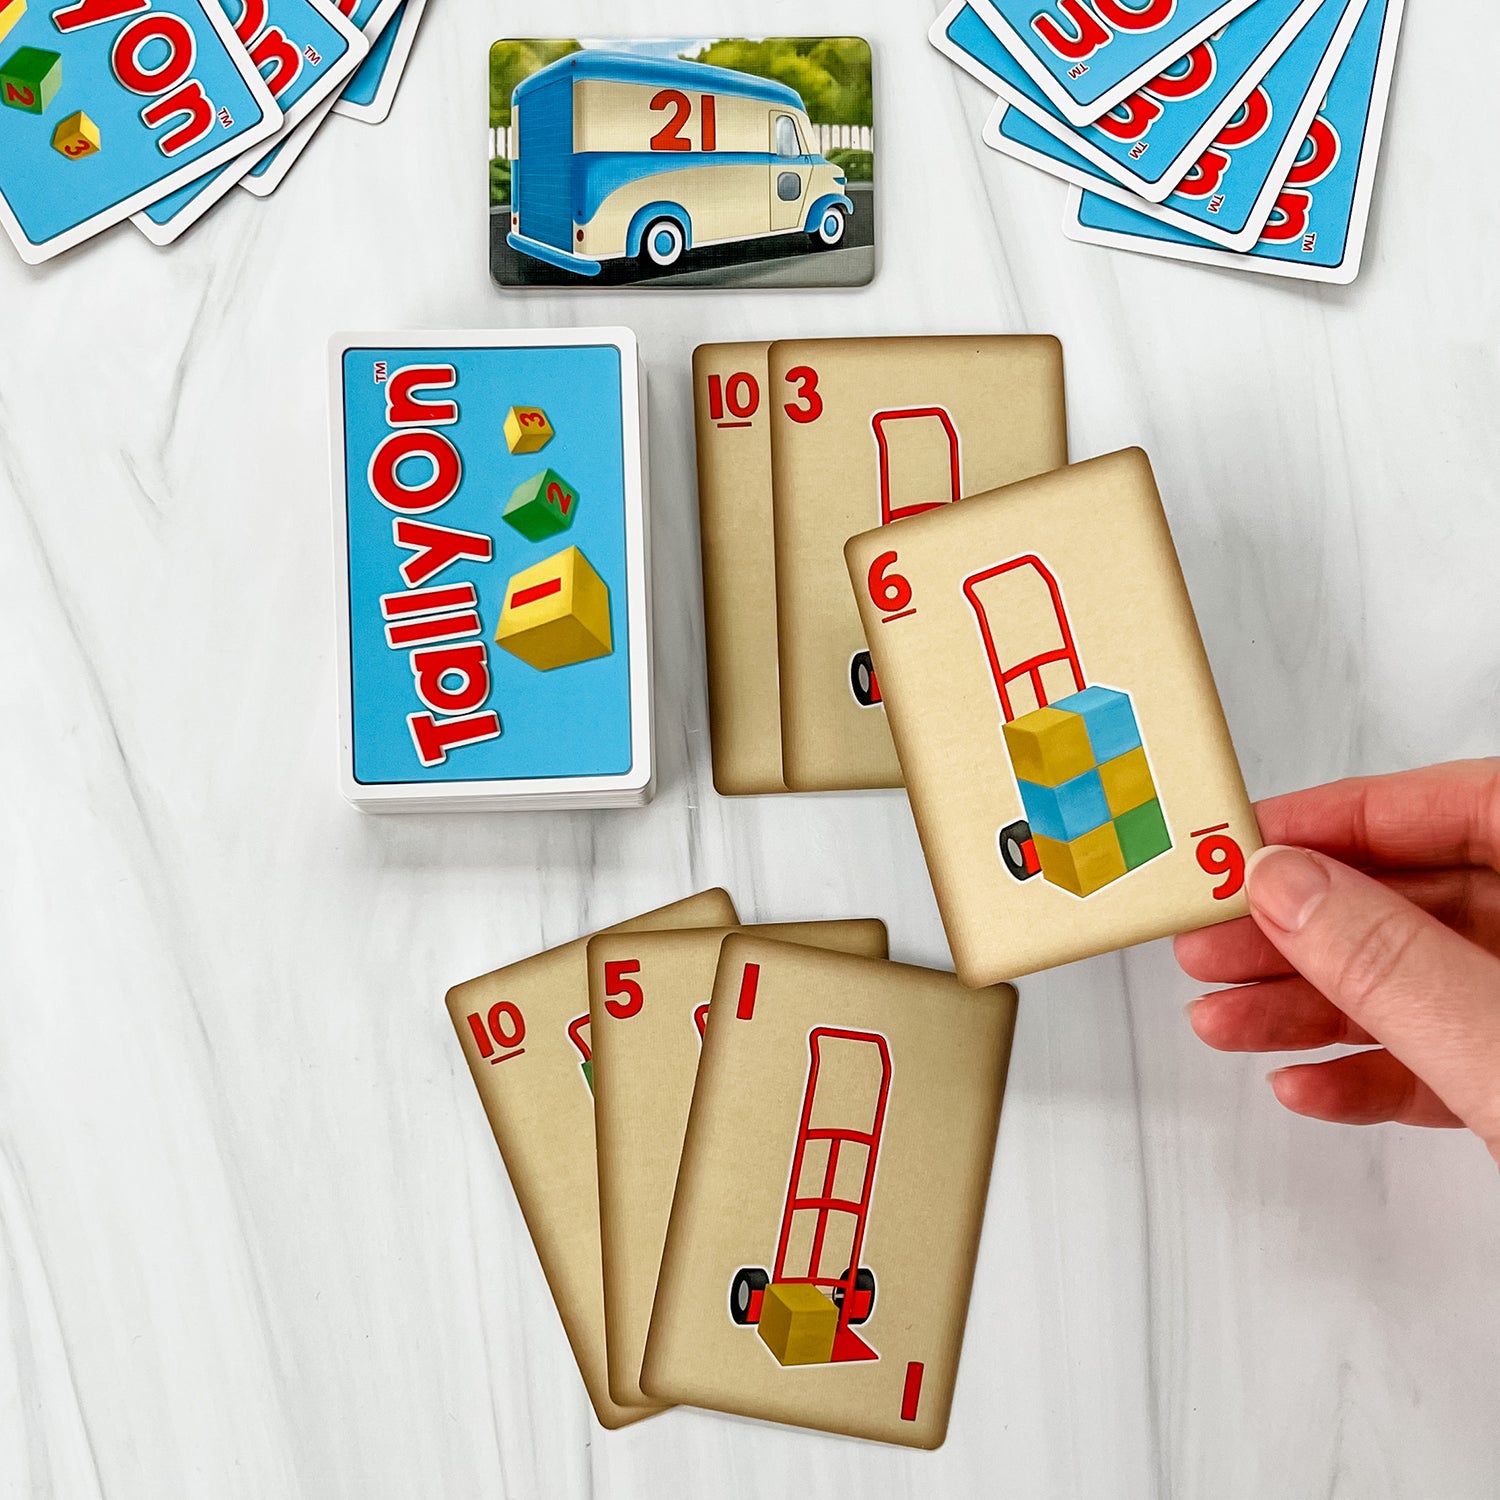 Tally On by SimplyFun is a fun math game for ages 5 and up focusing on counting and predicting.